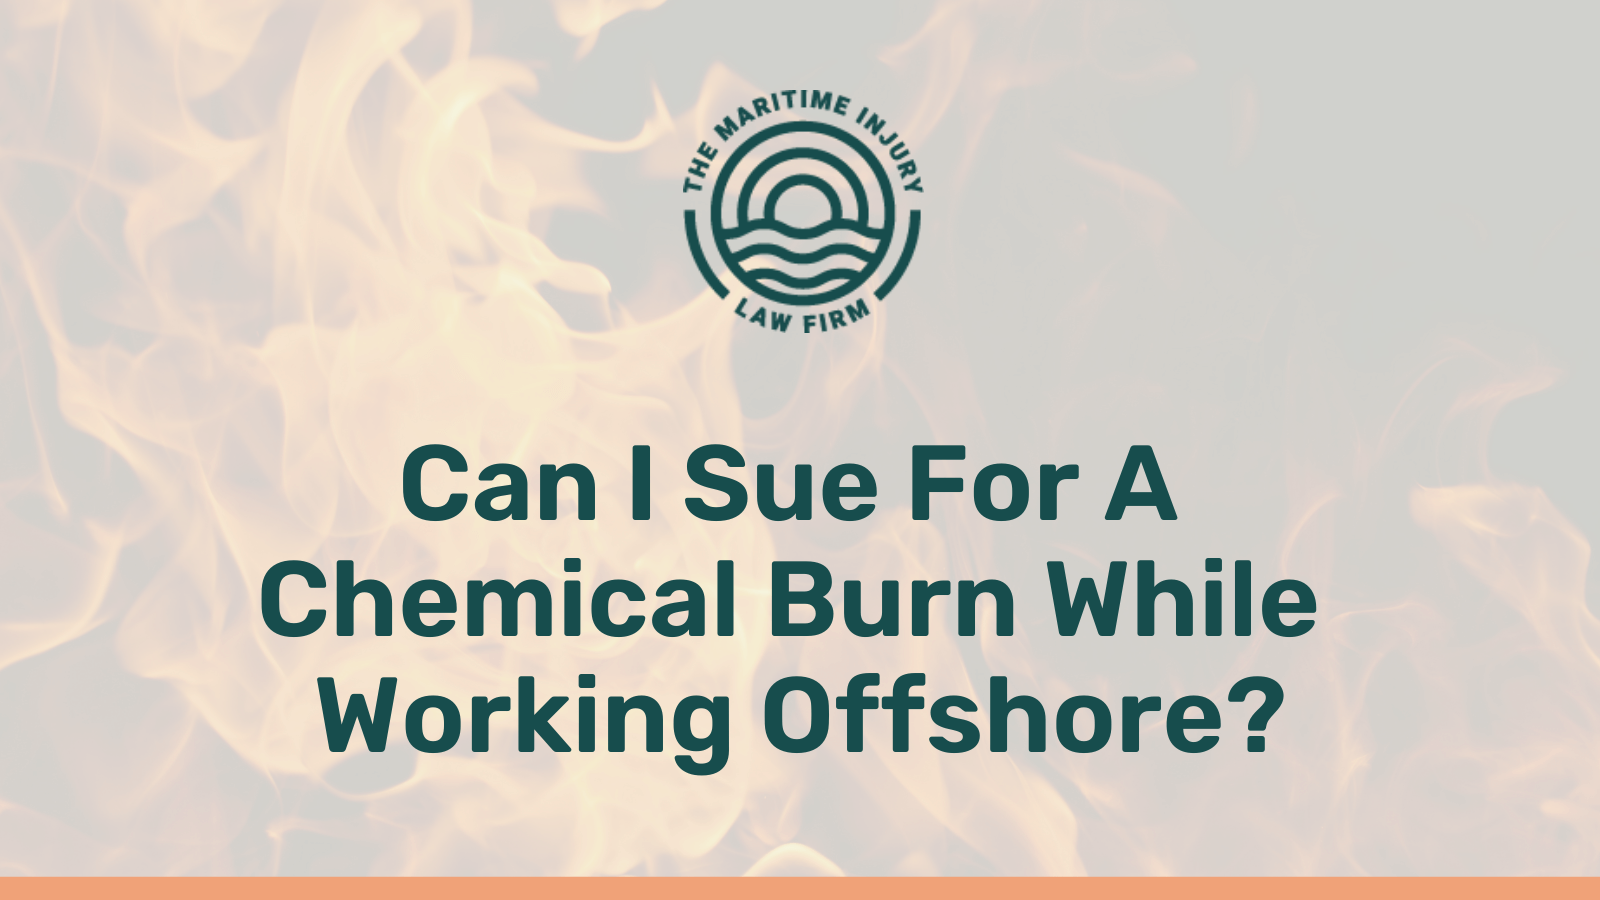 Can I Sue For A Chemical Burn While Working Offshore - maritime injury law firm - George Vourvoulias